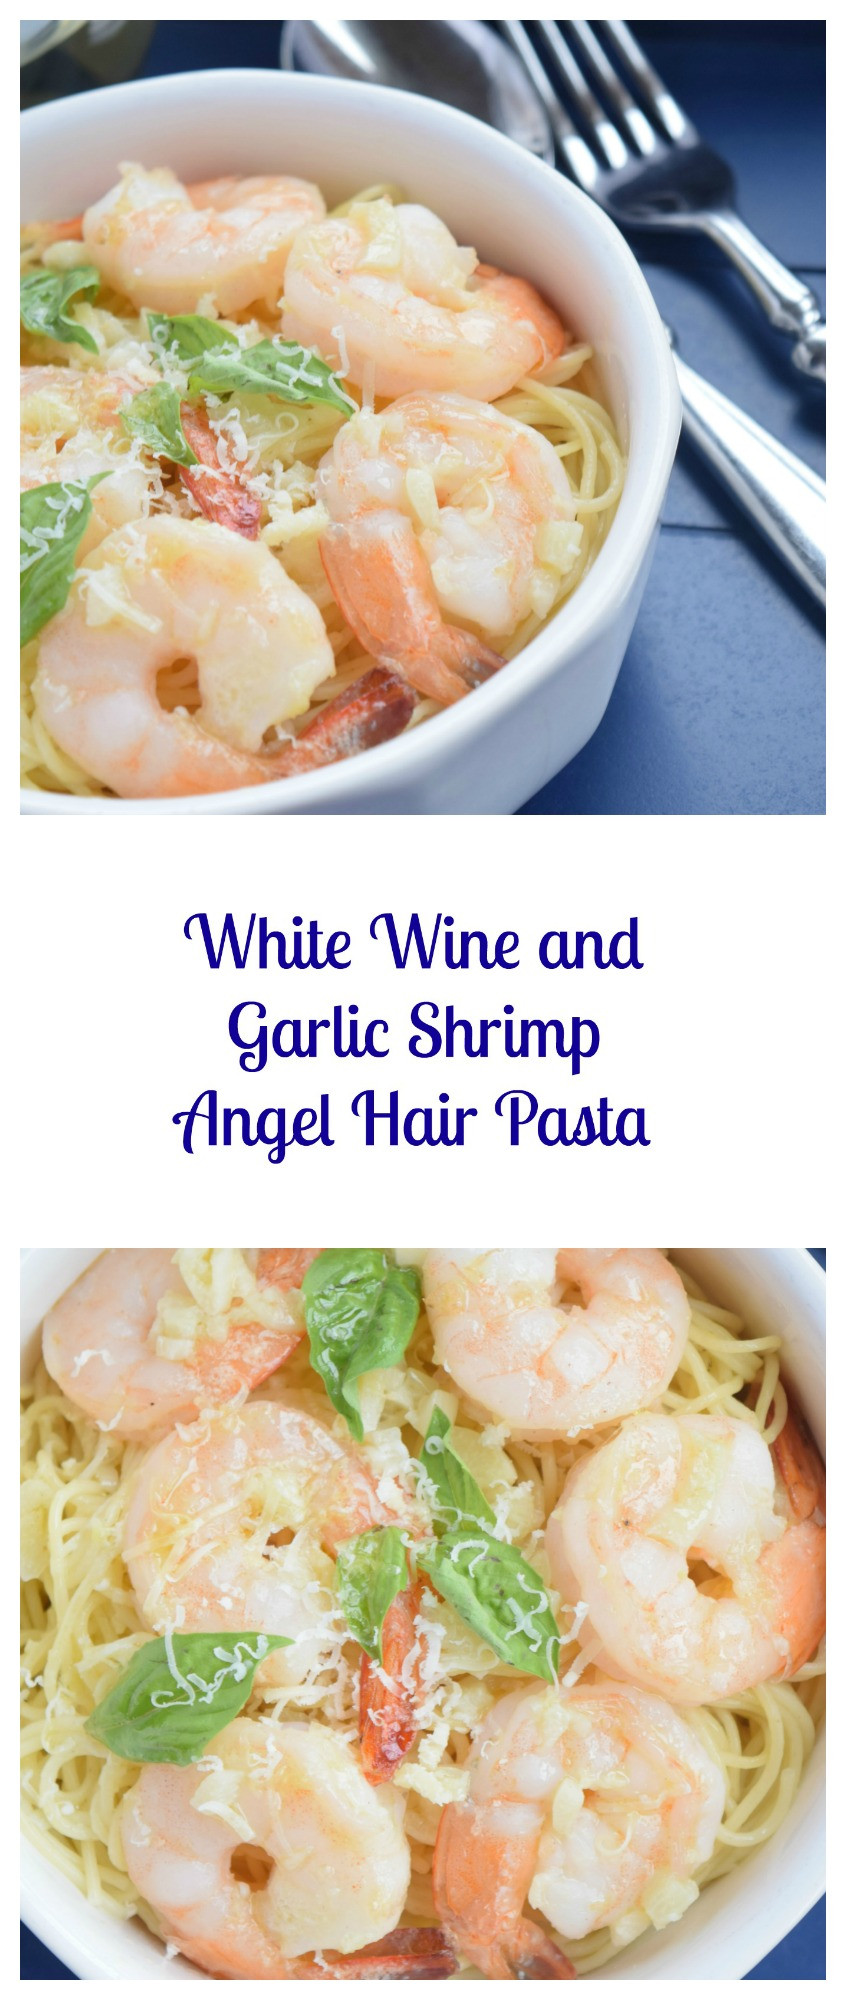 Angel Hair Pasta And Shrimp
 White Wine and Garlic Shrimp Angel Hair Pasta Beer Girl